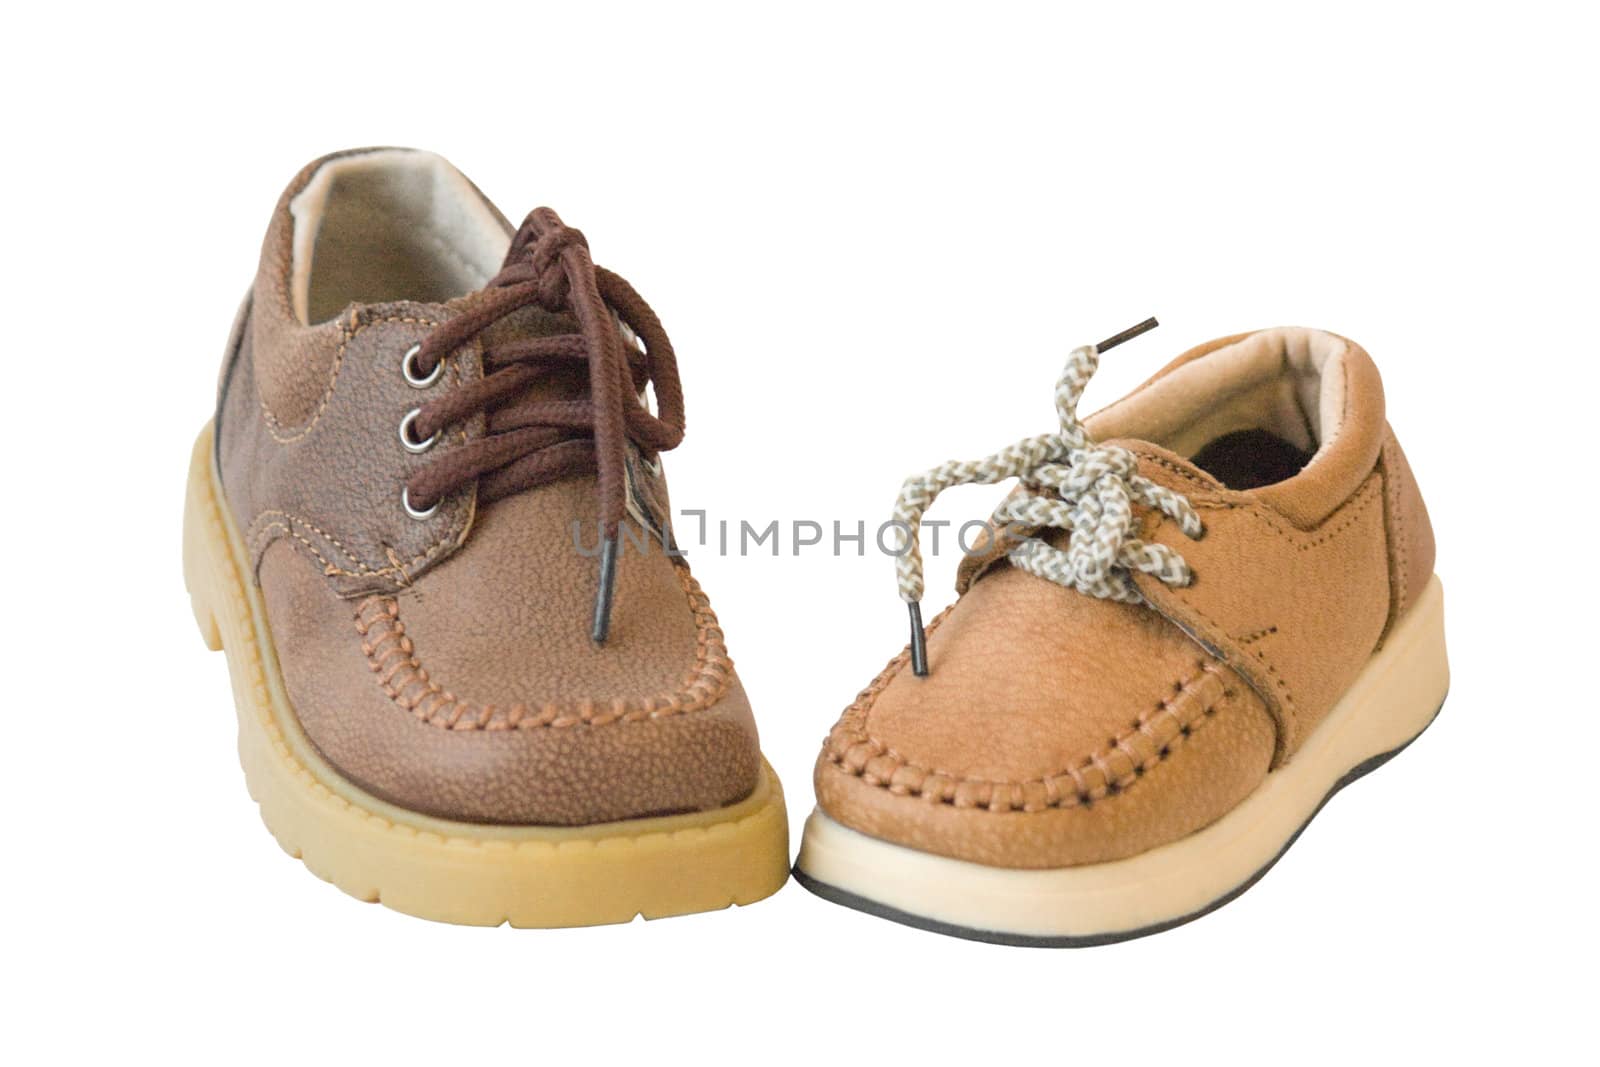 Brown leather child's shoe, isolated on a white background.